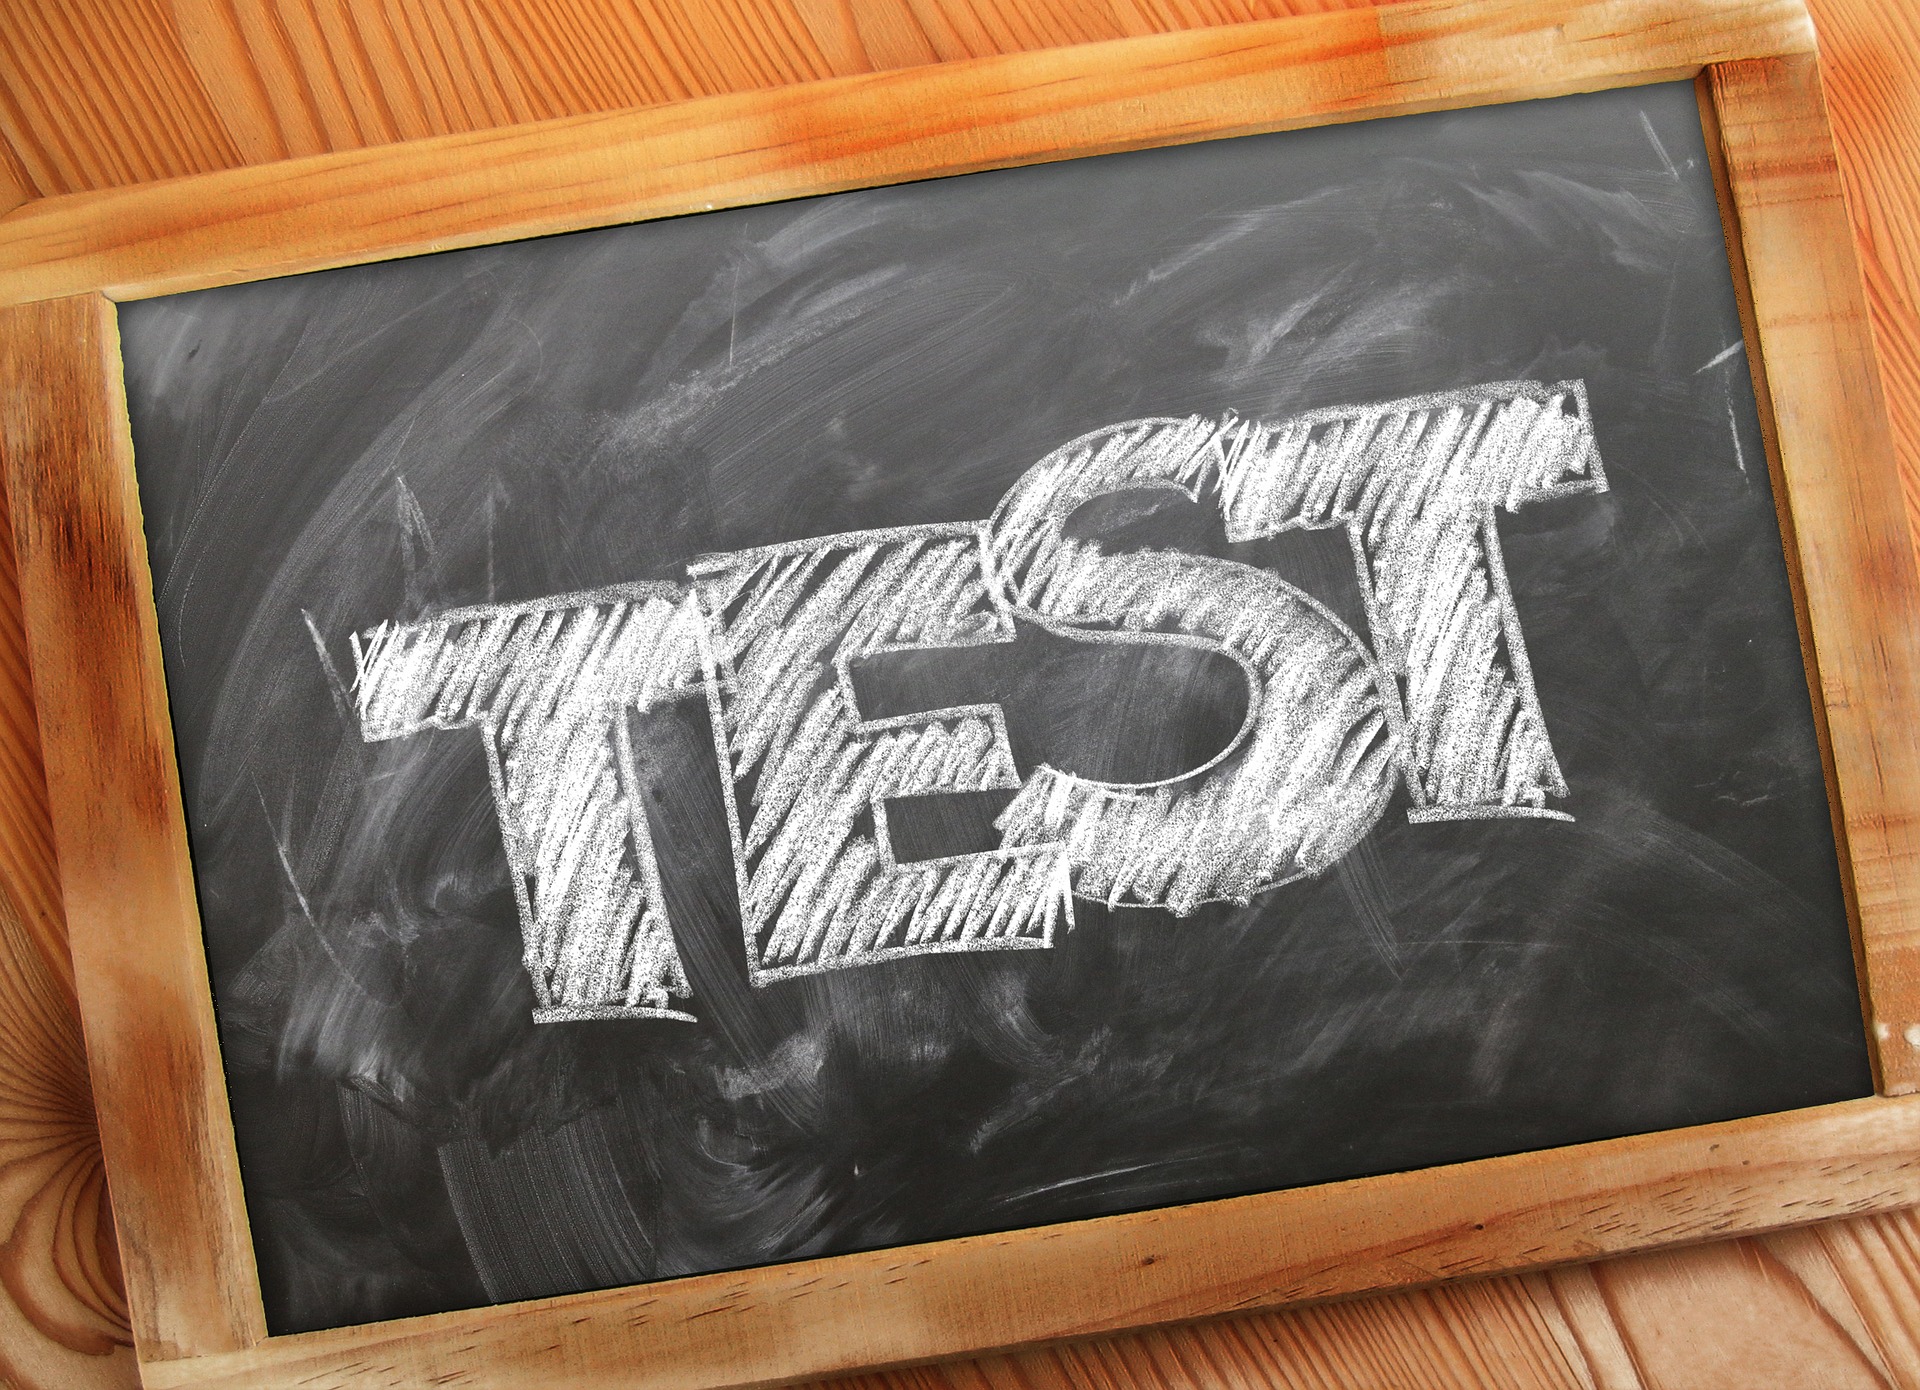 The very best software testing tools